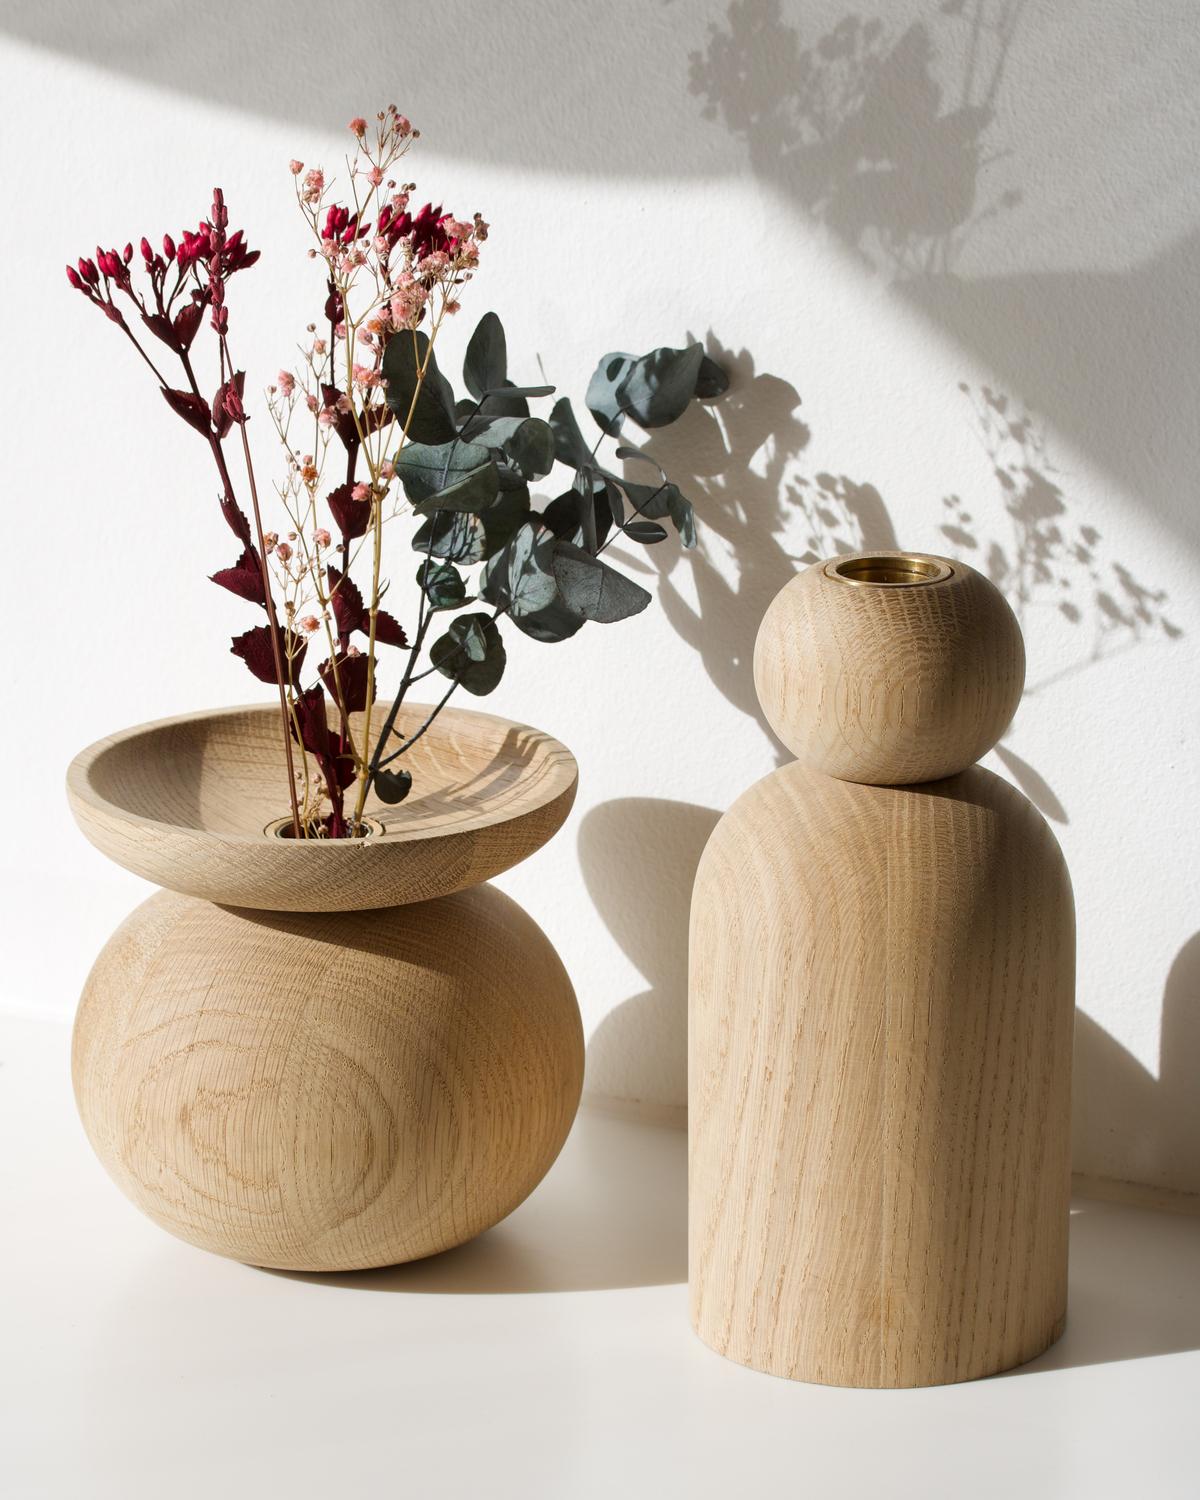 Ball Shape Oak Vase by Applicata
Dimensions: D 10 x W 10 x H 19 cm
Materials: Oak.

Available in Ball, Cone, and Bowl shape.
Available in oak, smoked oak, and black stained oak.

The Shape vase collection is a series of sensuous objects with